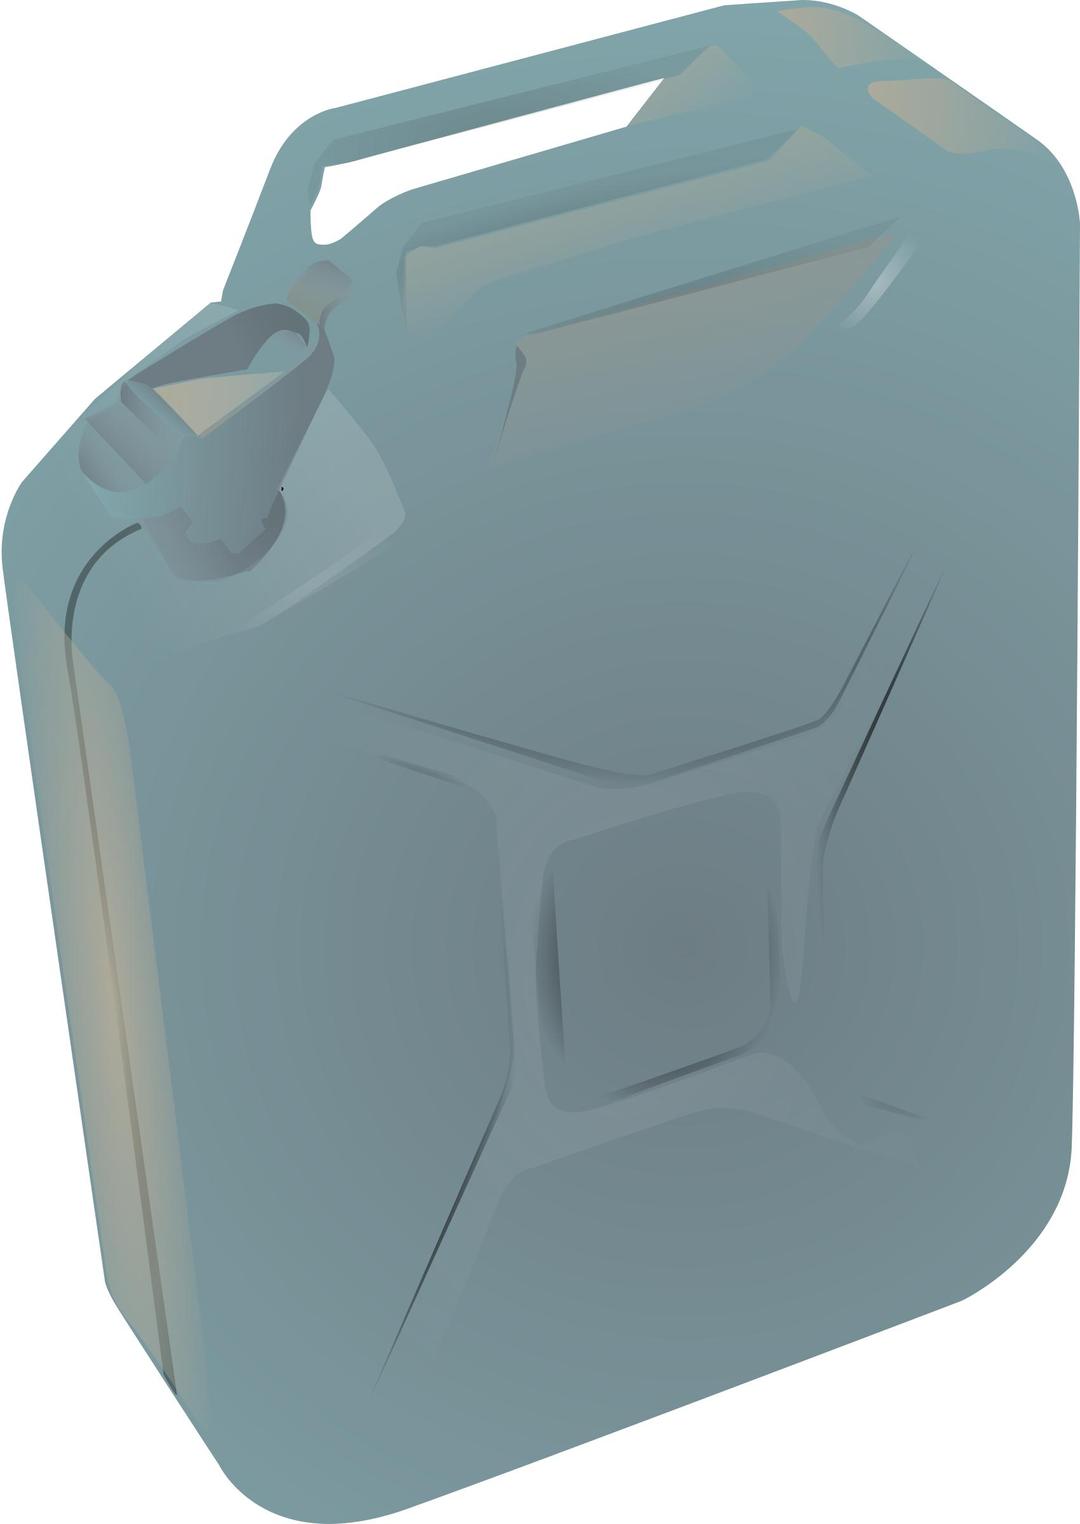 "Jerry" canister png transparent